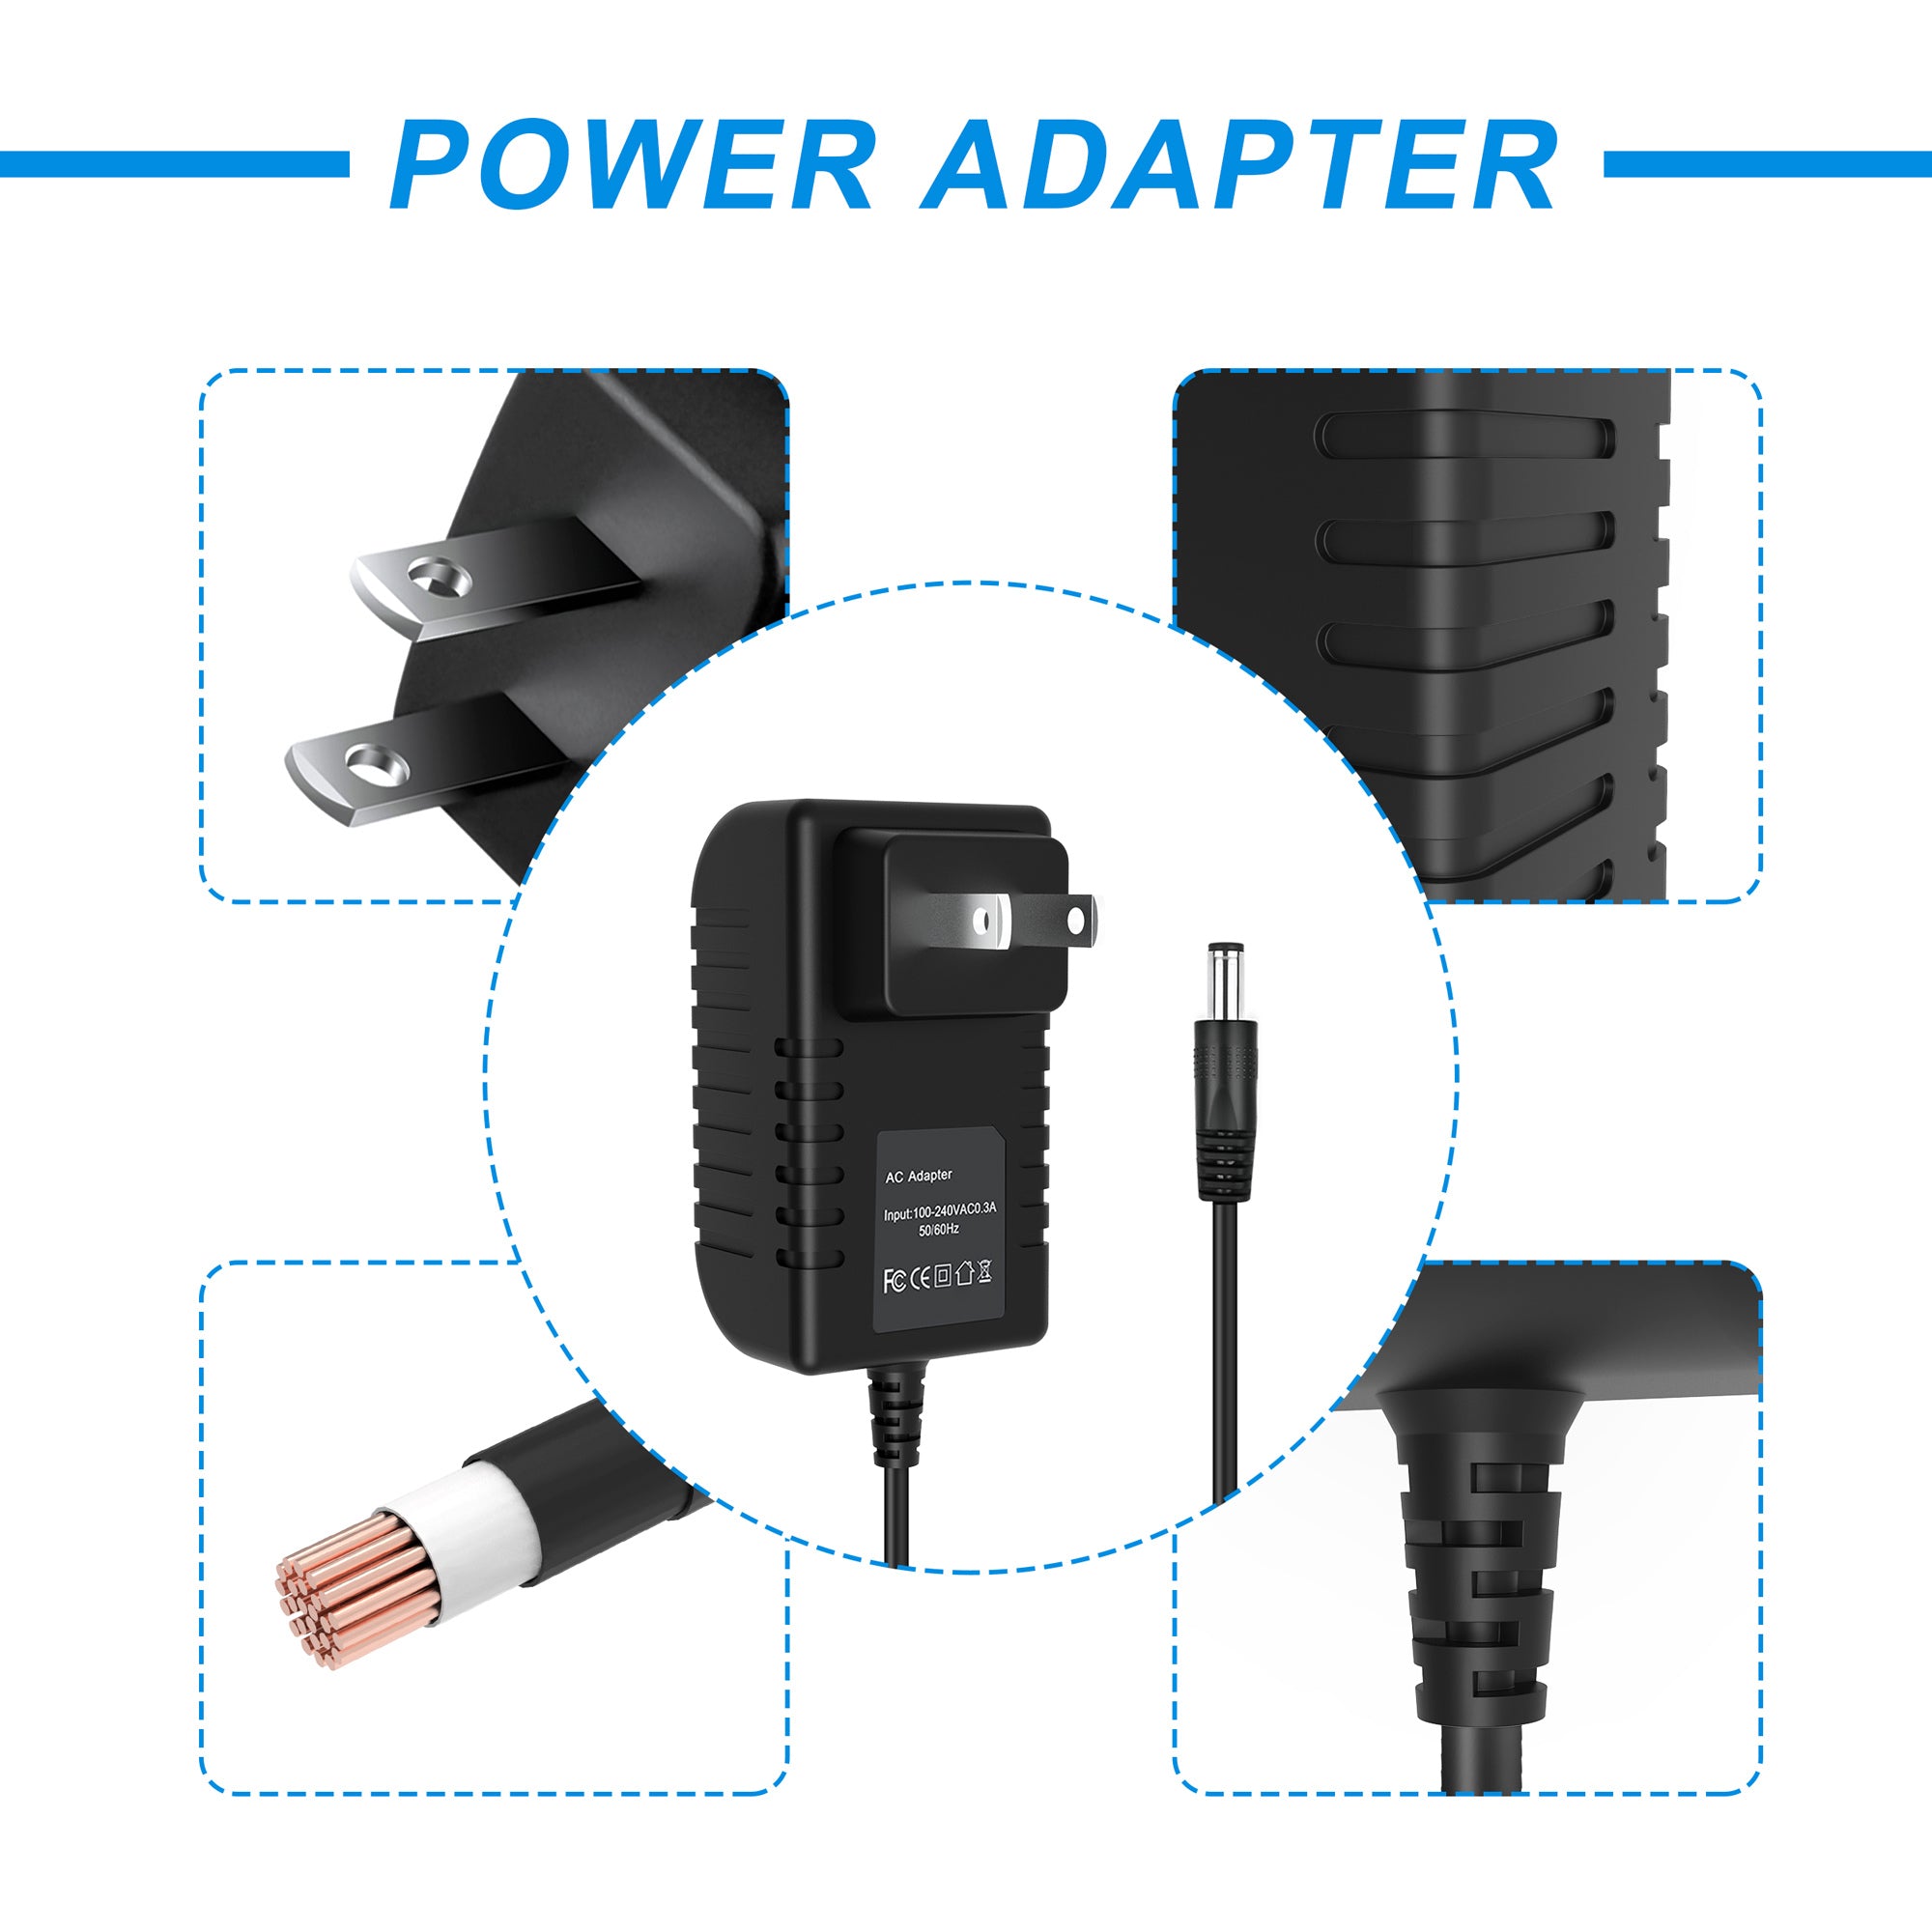 AbleGrid AC/DC Adapter Compatible with Tascam RC-900 DVD Player Power Supply Cord Cable PS Wall Home Charger Input: 100V - 120V AC - 240 VAC 50/60Hz Worldwide Voltage Use Mains PSU